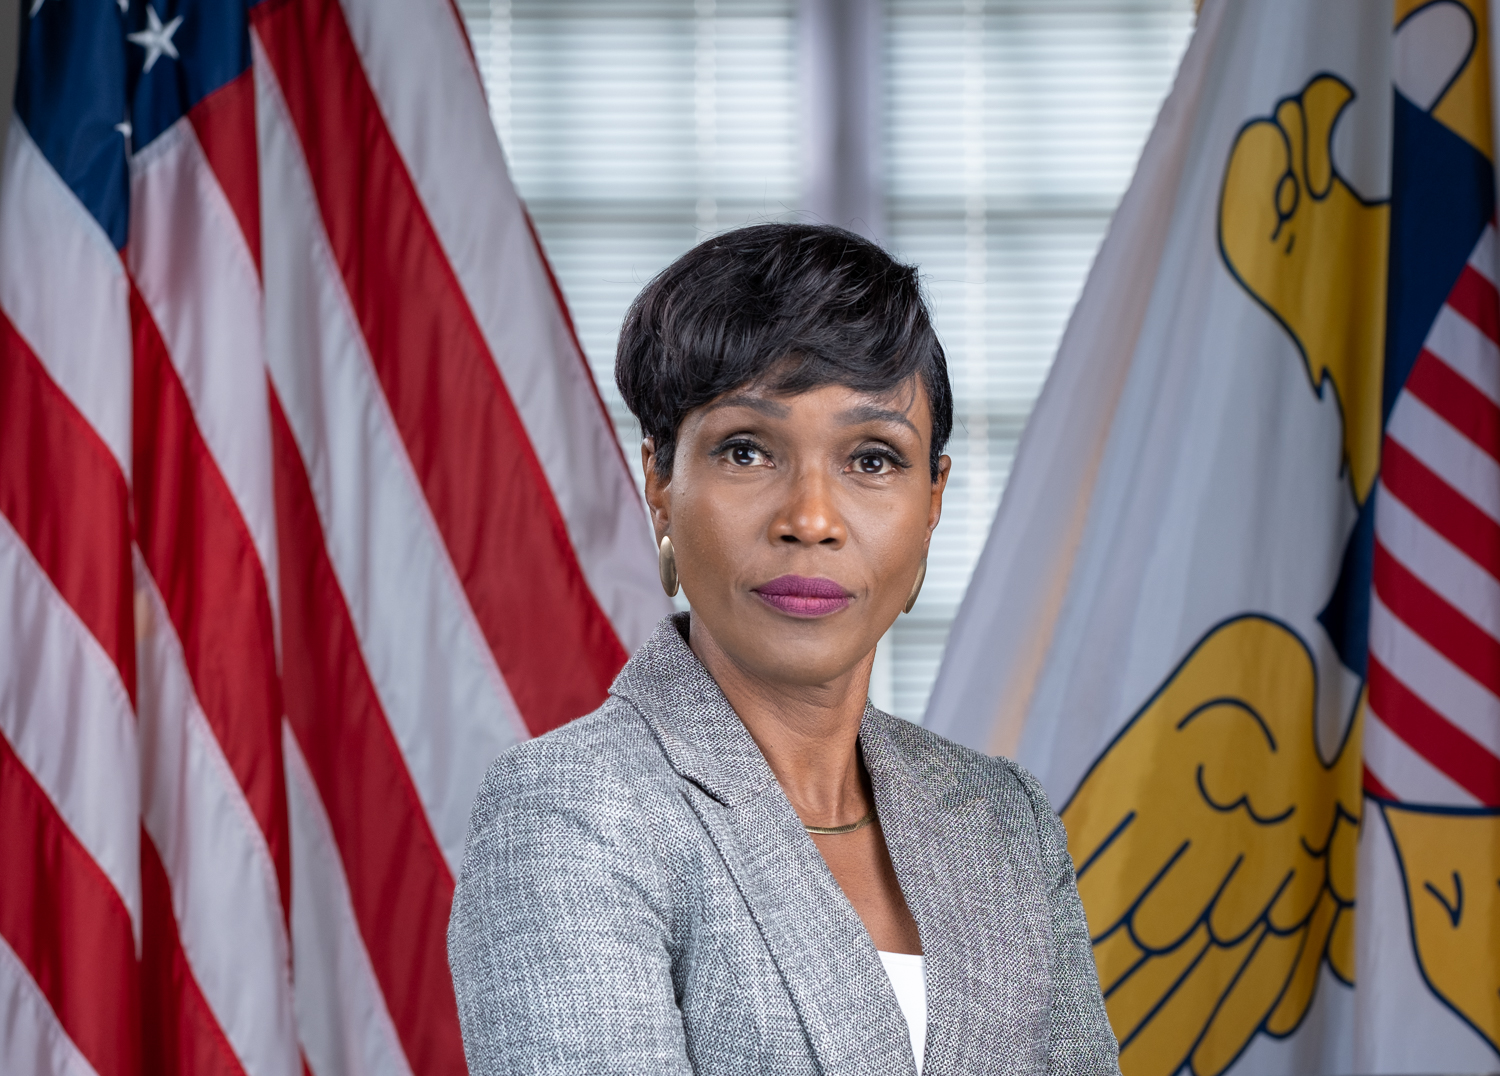 https://stcroixsource.com/wp-content/uploads/sites/3/2019/10/Denise-George-Attorney-General-Nominee-.jpg